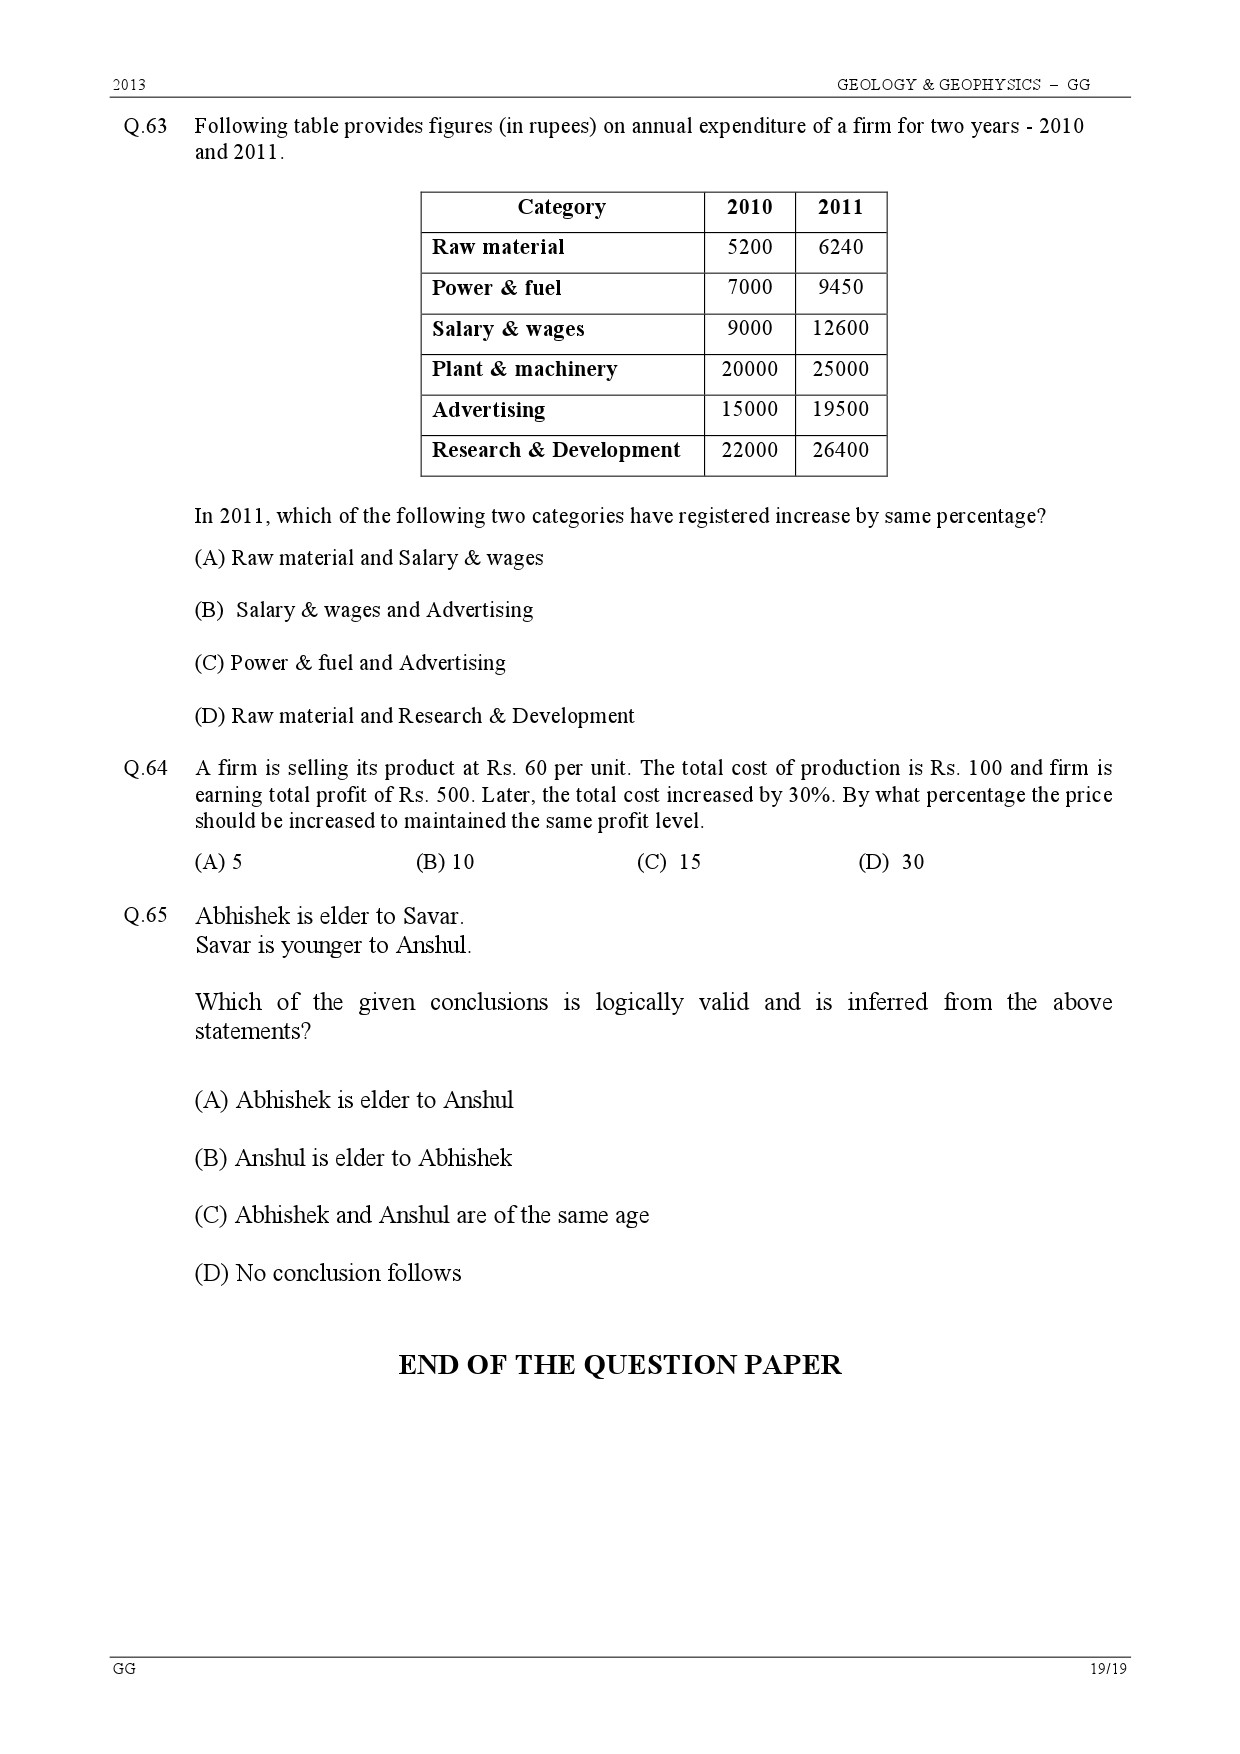 GATE Exam Question Paper 2013 Geology and Geophysics 19